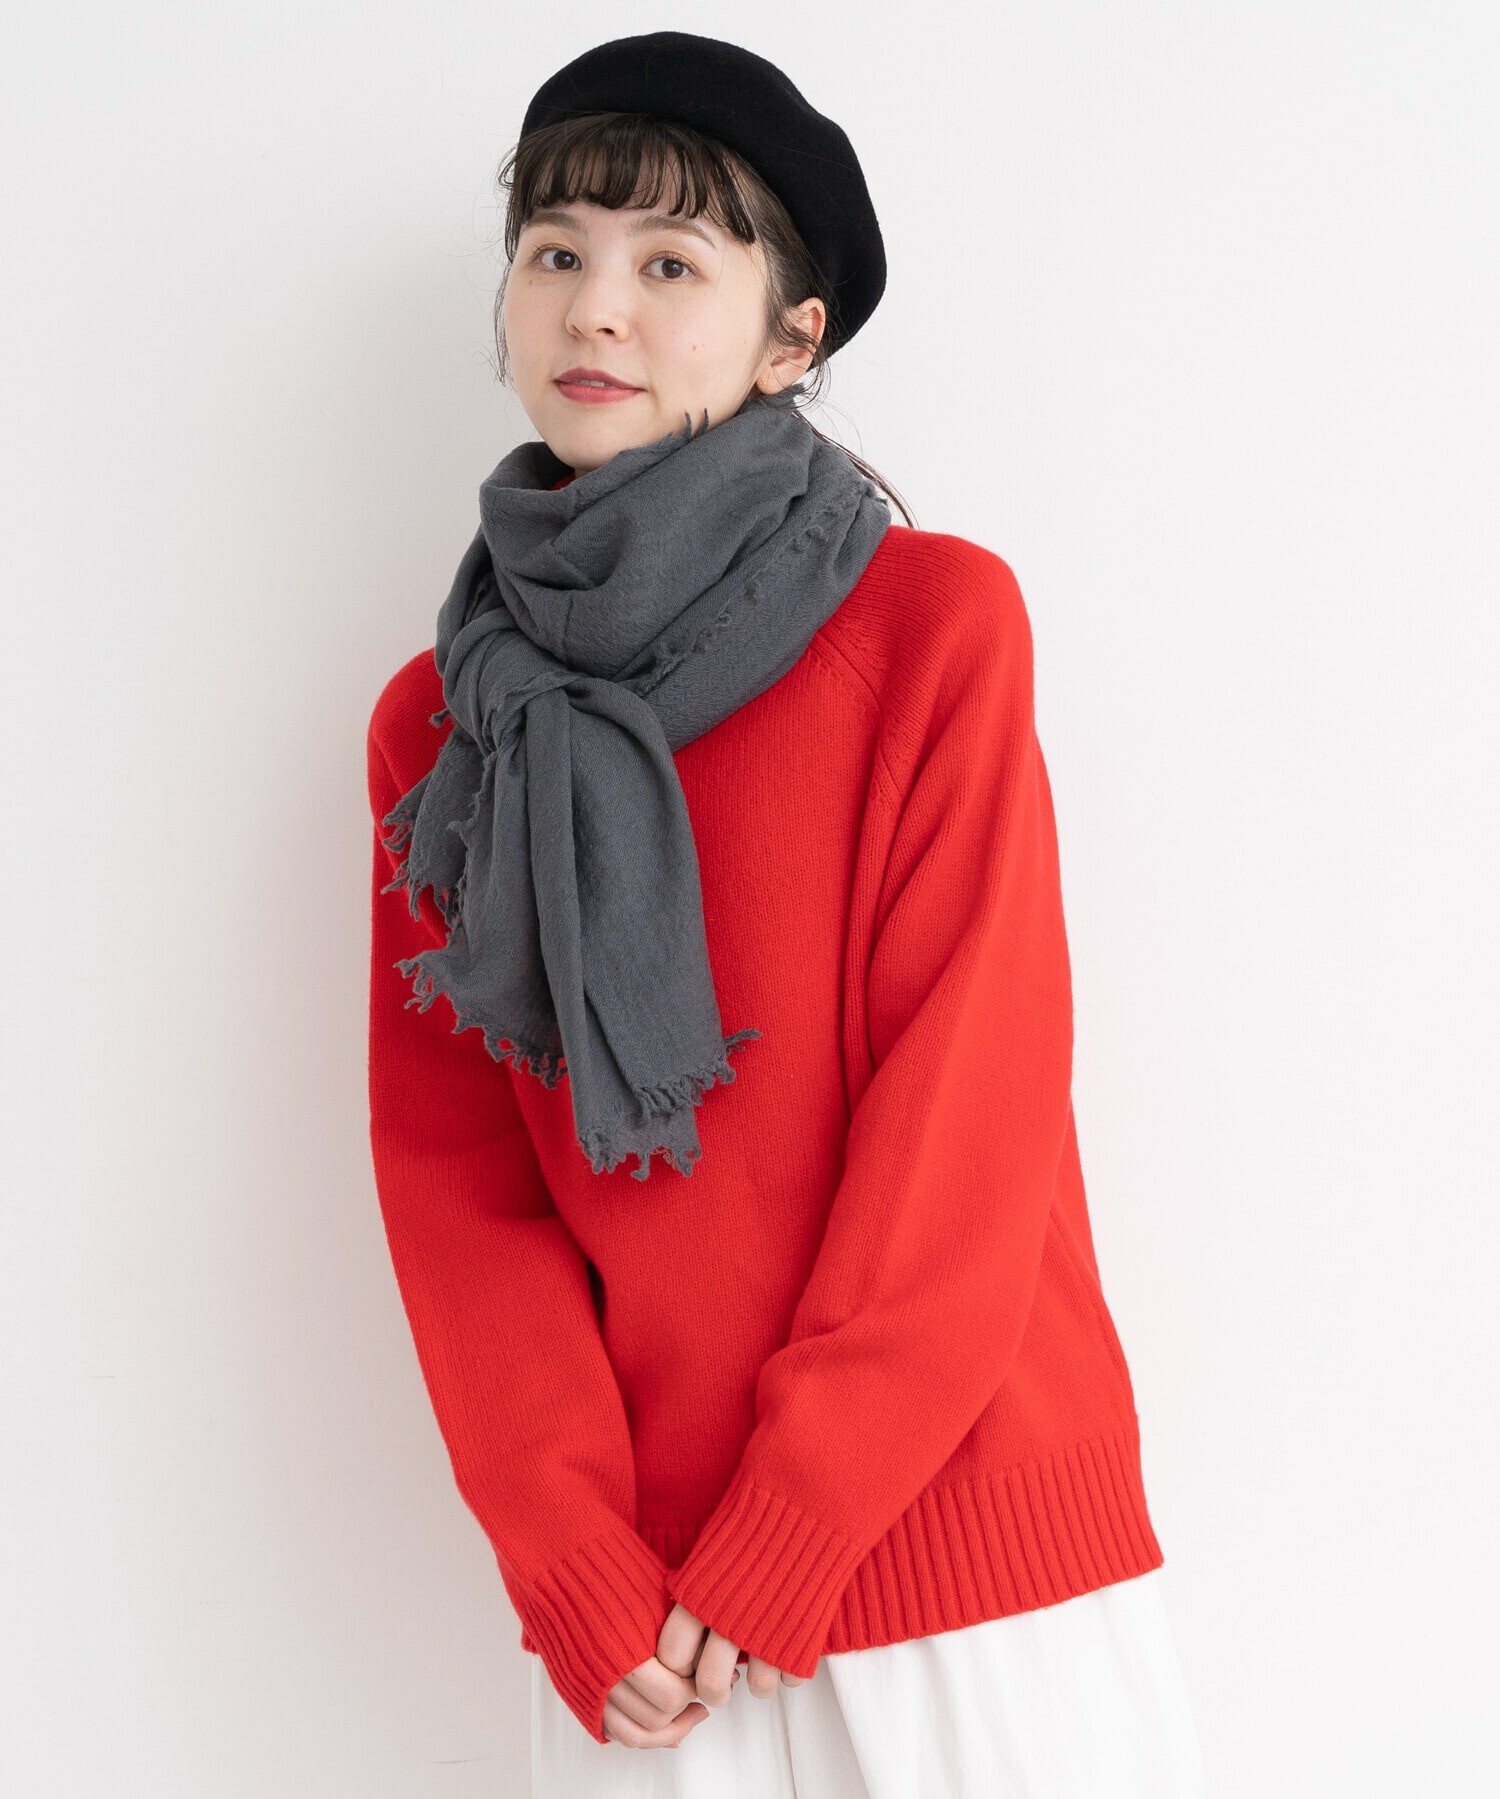 AMBIDEX Store WOOL ストール(F コン): Dot and Stripes CHILD WOMAN